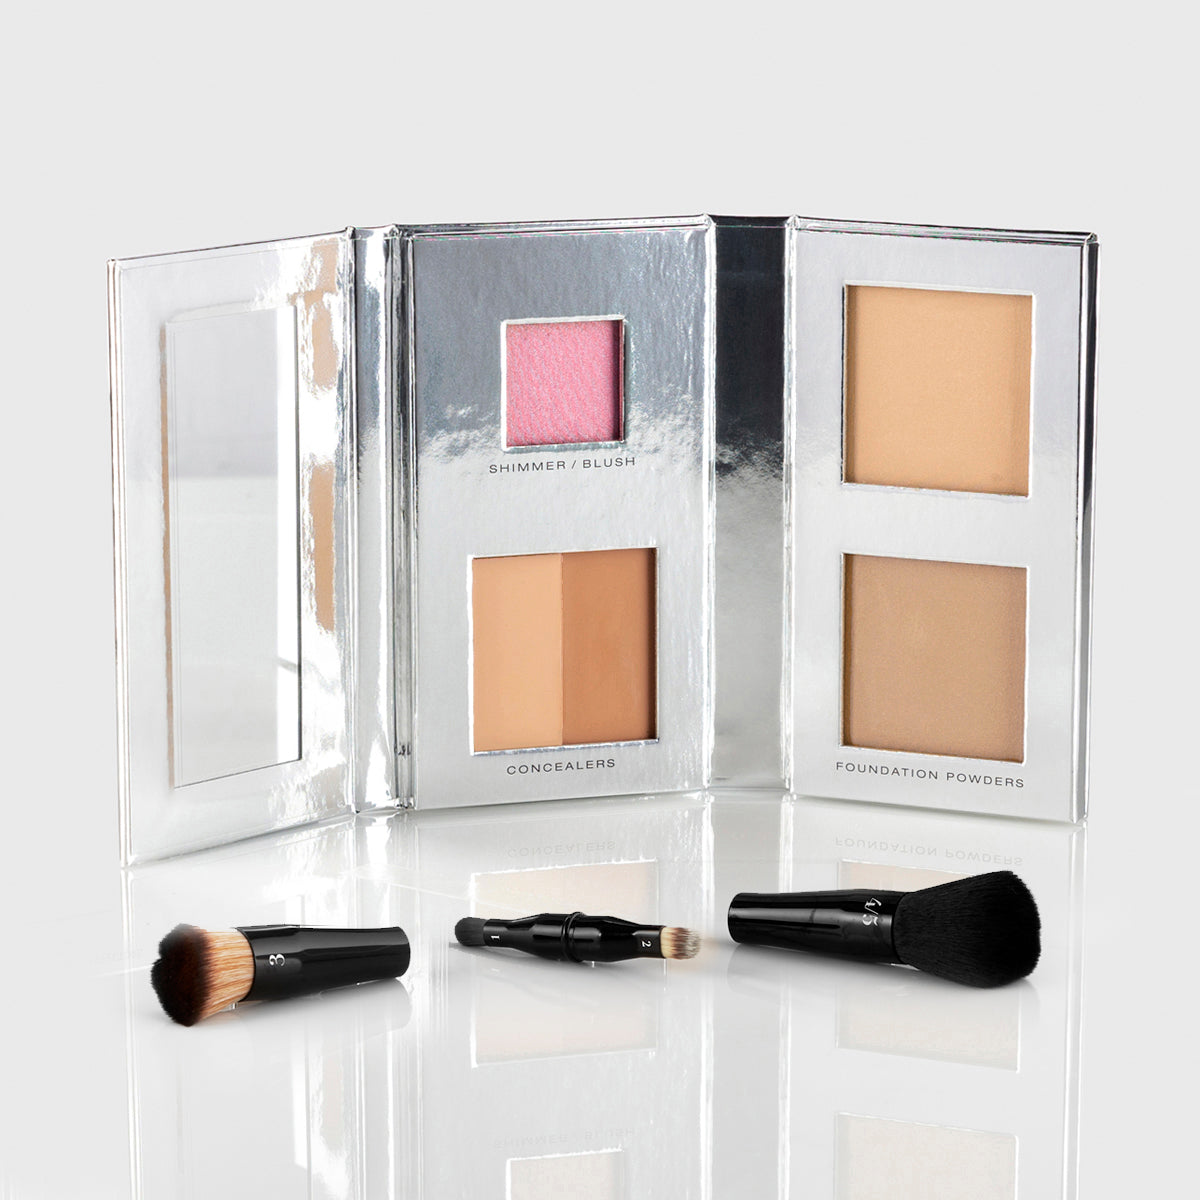 a silver makeup palette with mirrored flap and 1 blush, 2 concealers and 2 foundation powers in medium tan shades; a black, travel-sized nesting brush set is splayed out in front of the palette